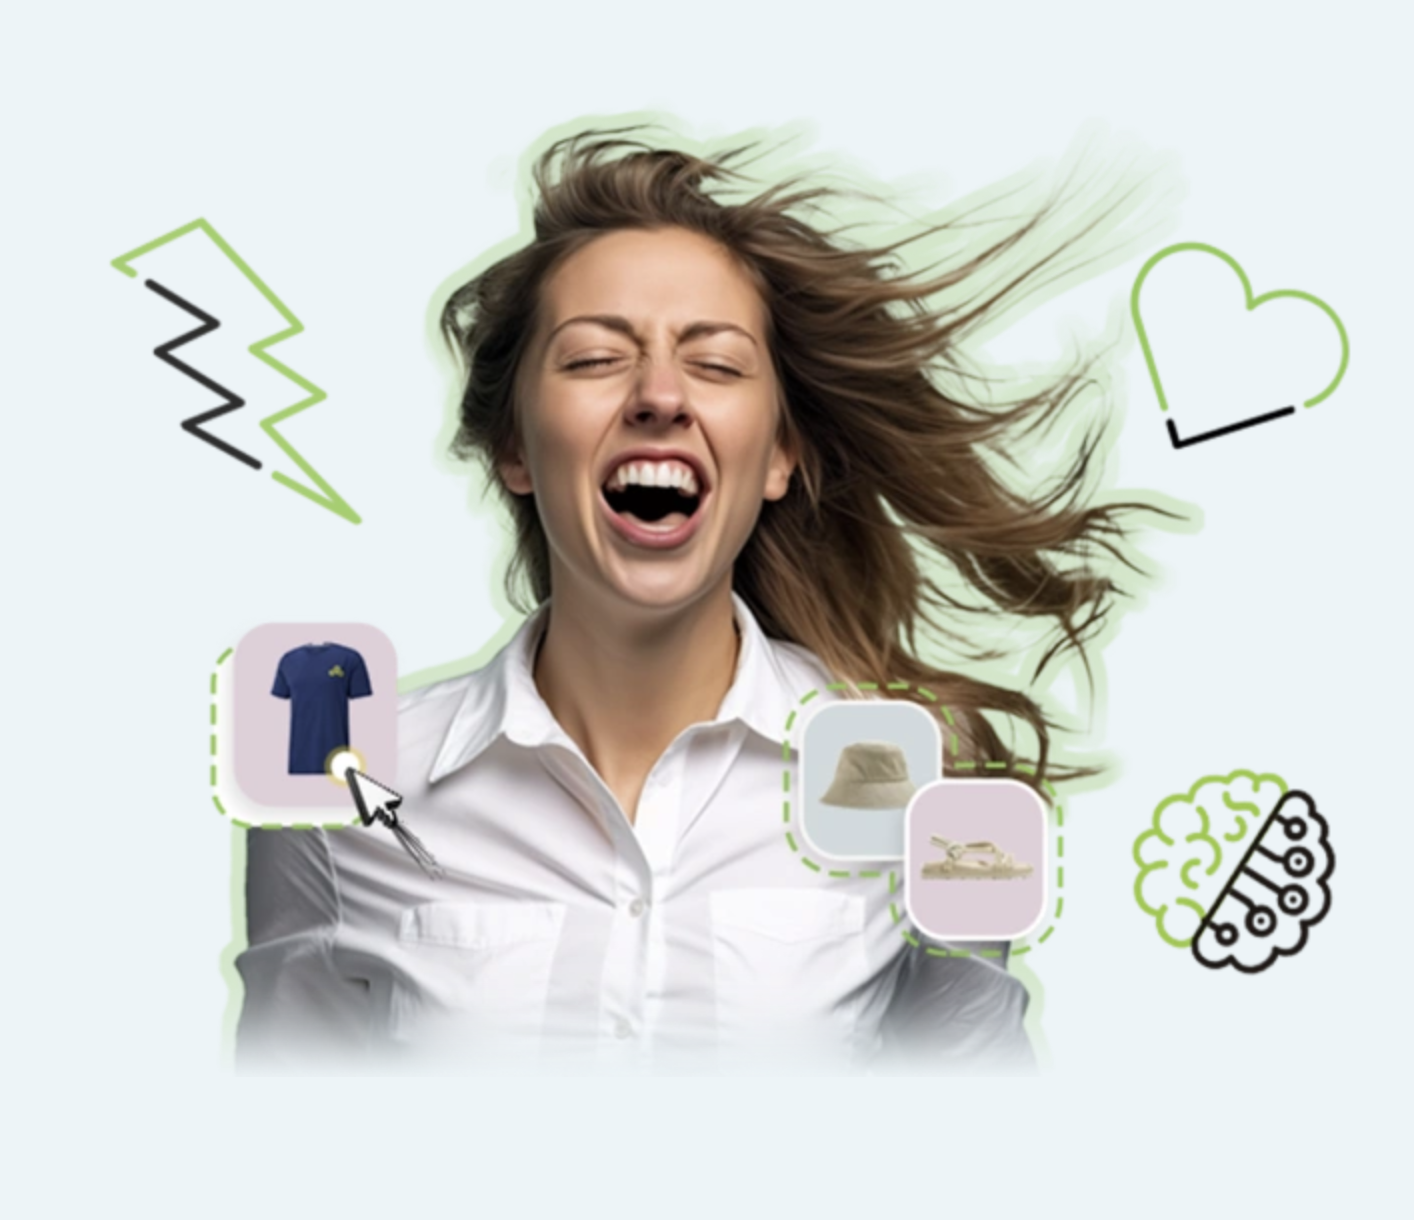 Abstract image for Klevu of white woman screaming with joy